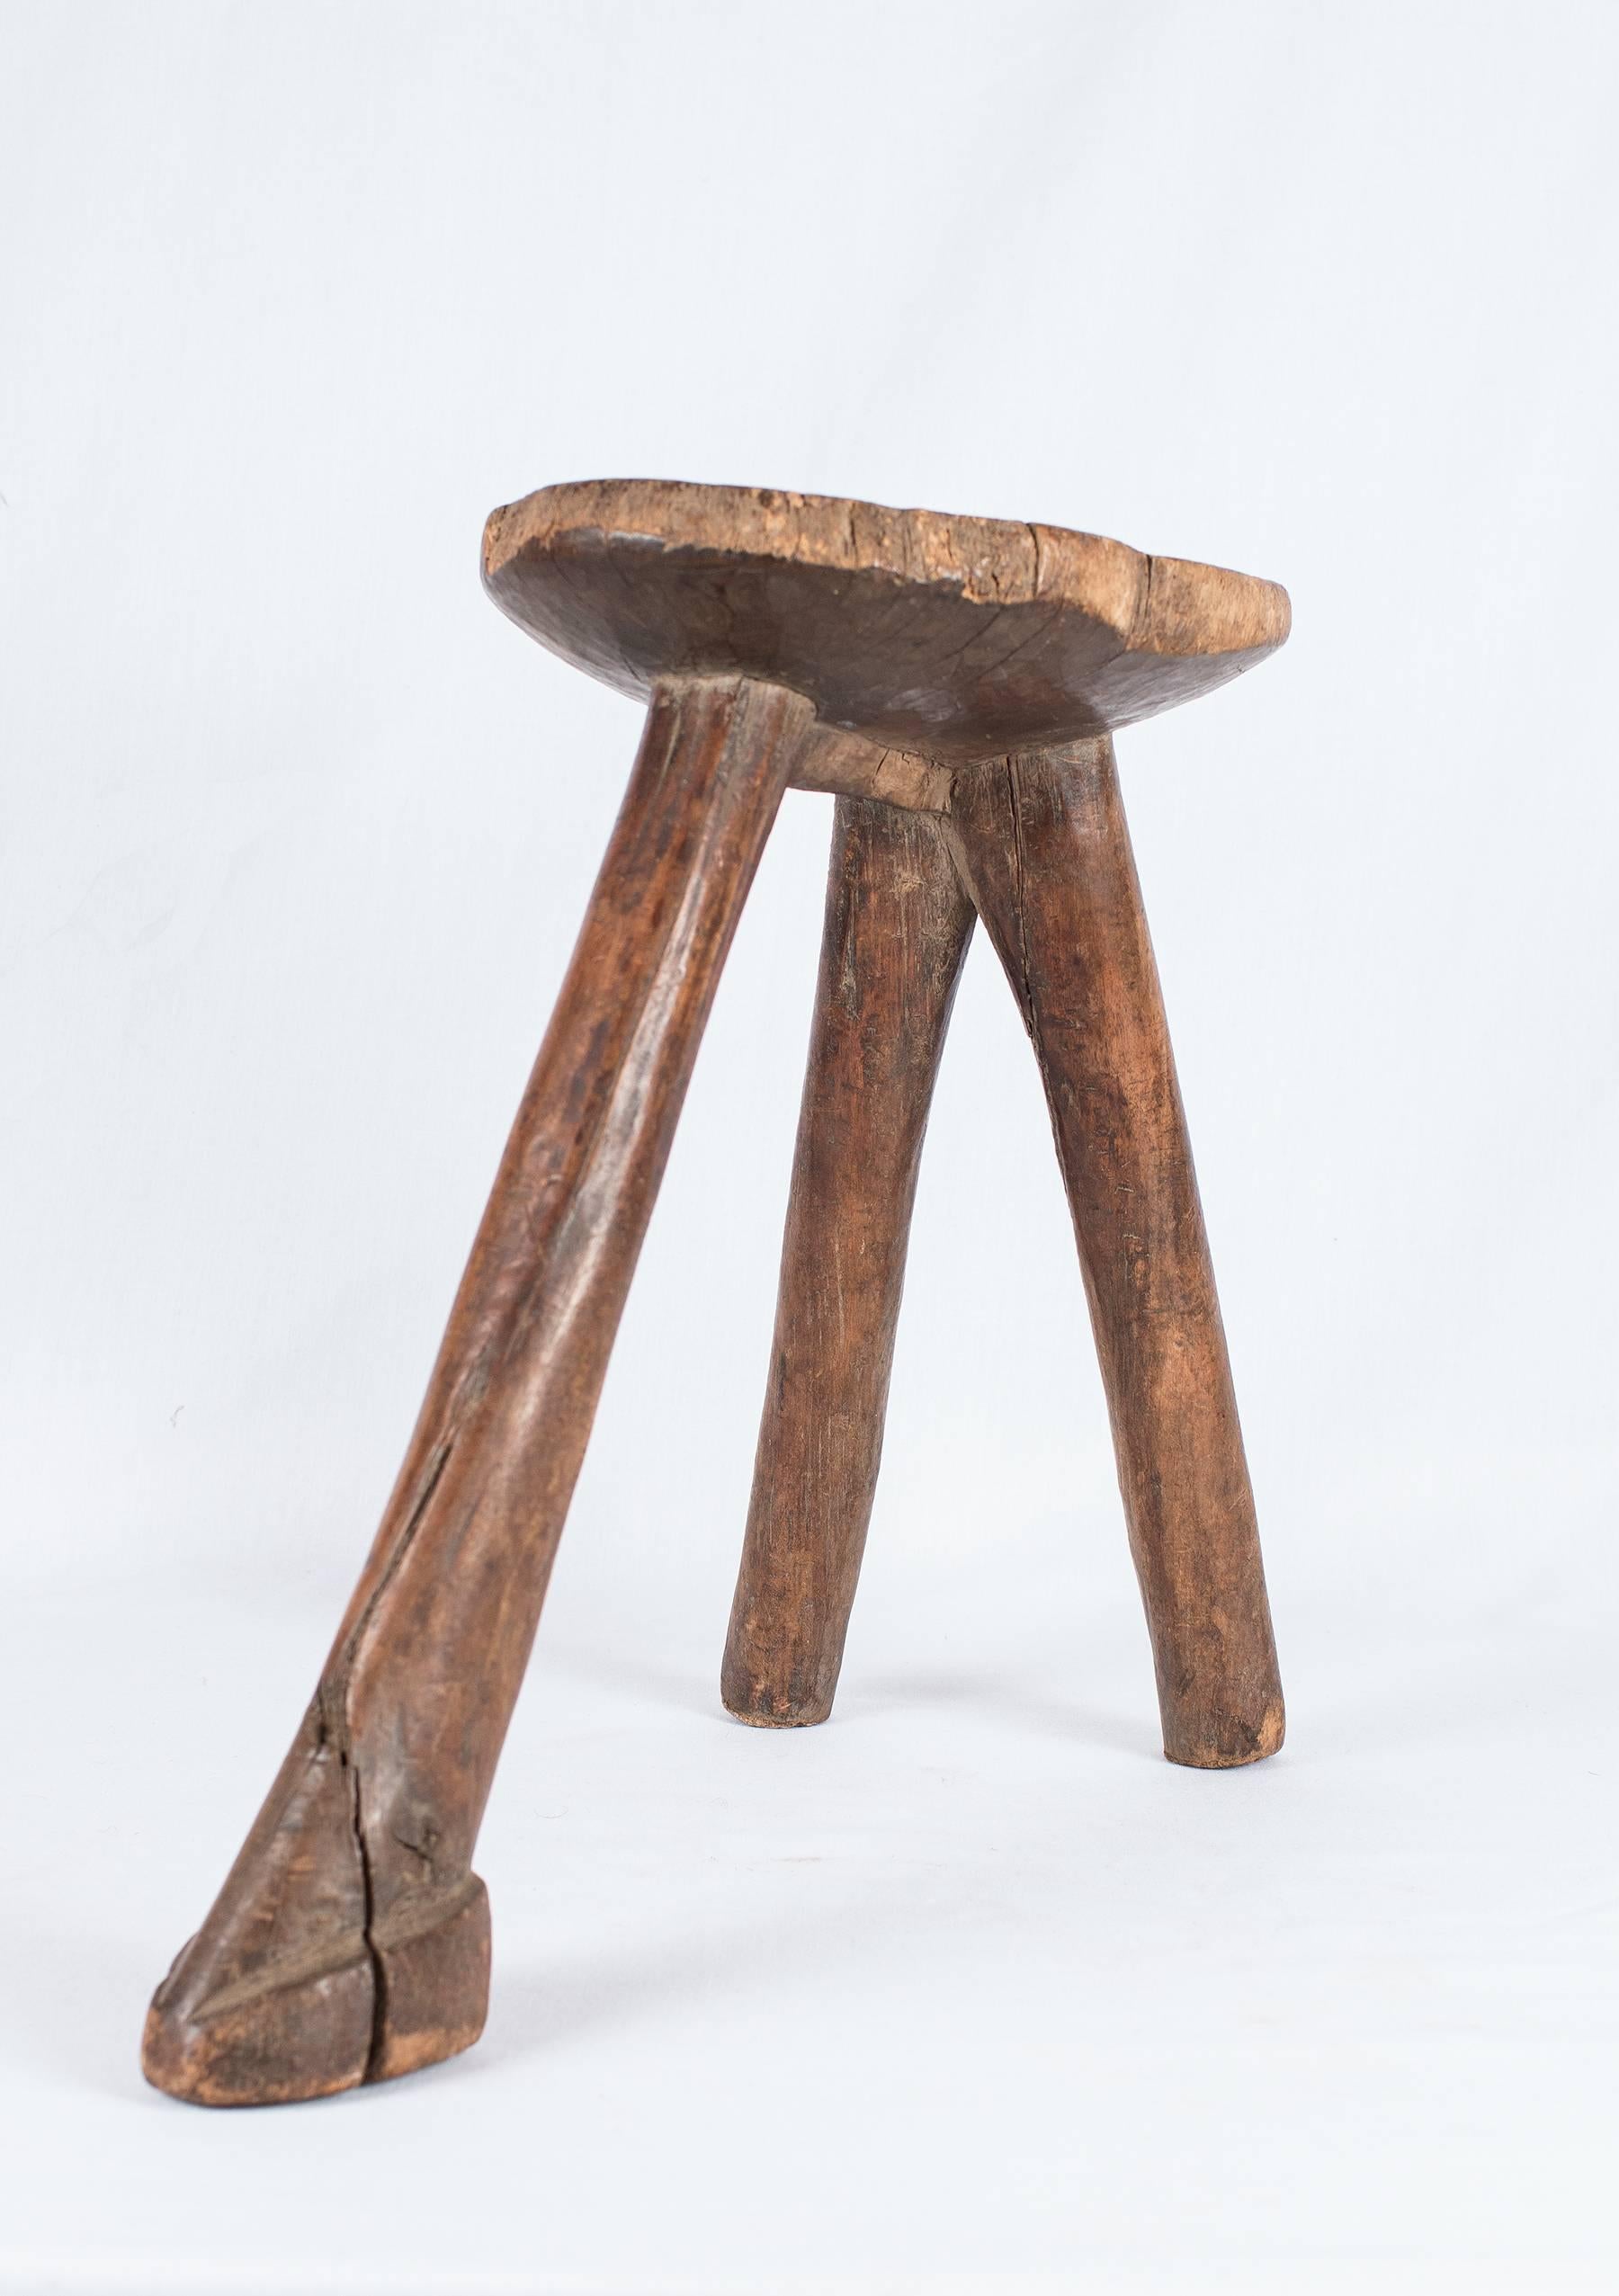 This African Lobi stool was created by the Lobi People of Ghana. It was carved from single blocks of wood, and has a wonderfully simple form. It has aged beautifully by use and exposure. This seat is surprisingly comfortable and well-balanced. We